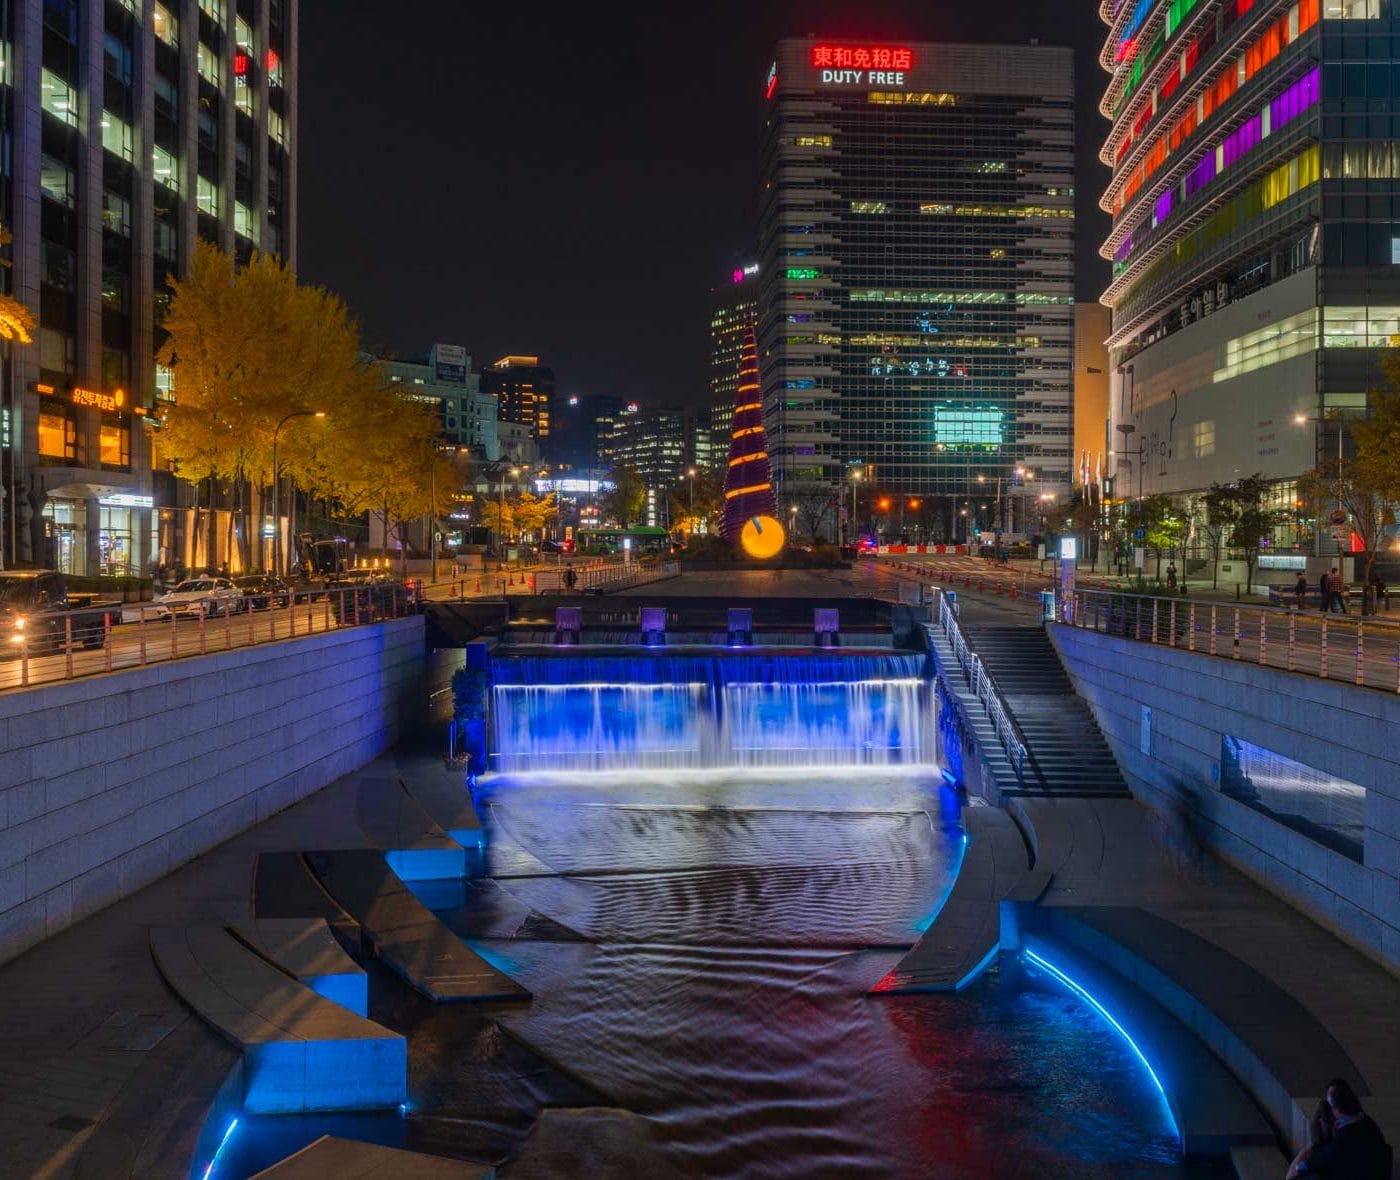 Seoul at Night - Best Views, Activities, Areas and More 12